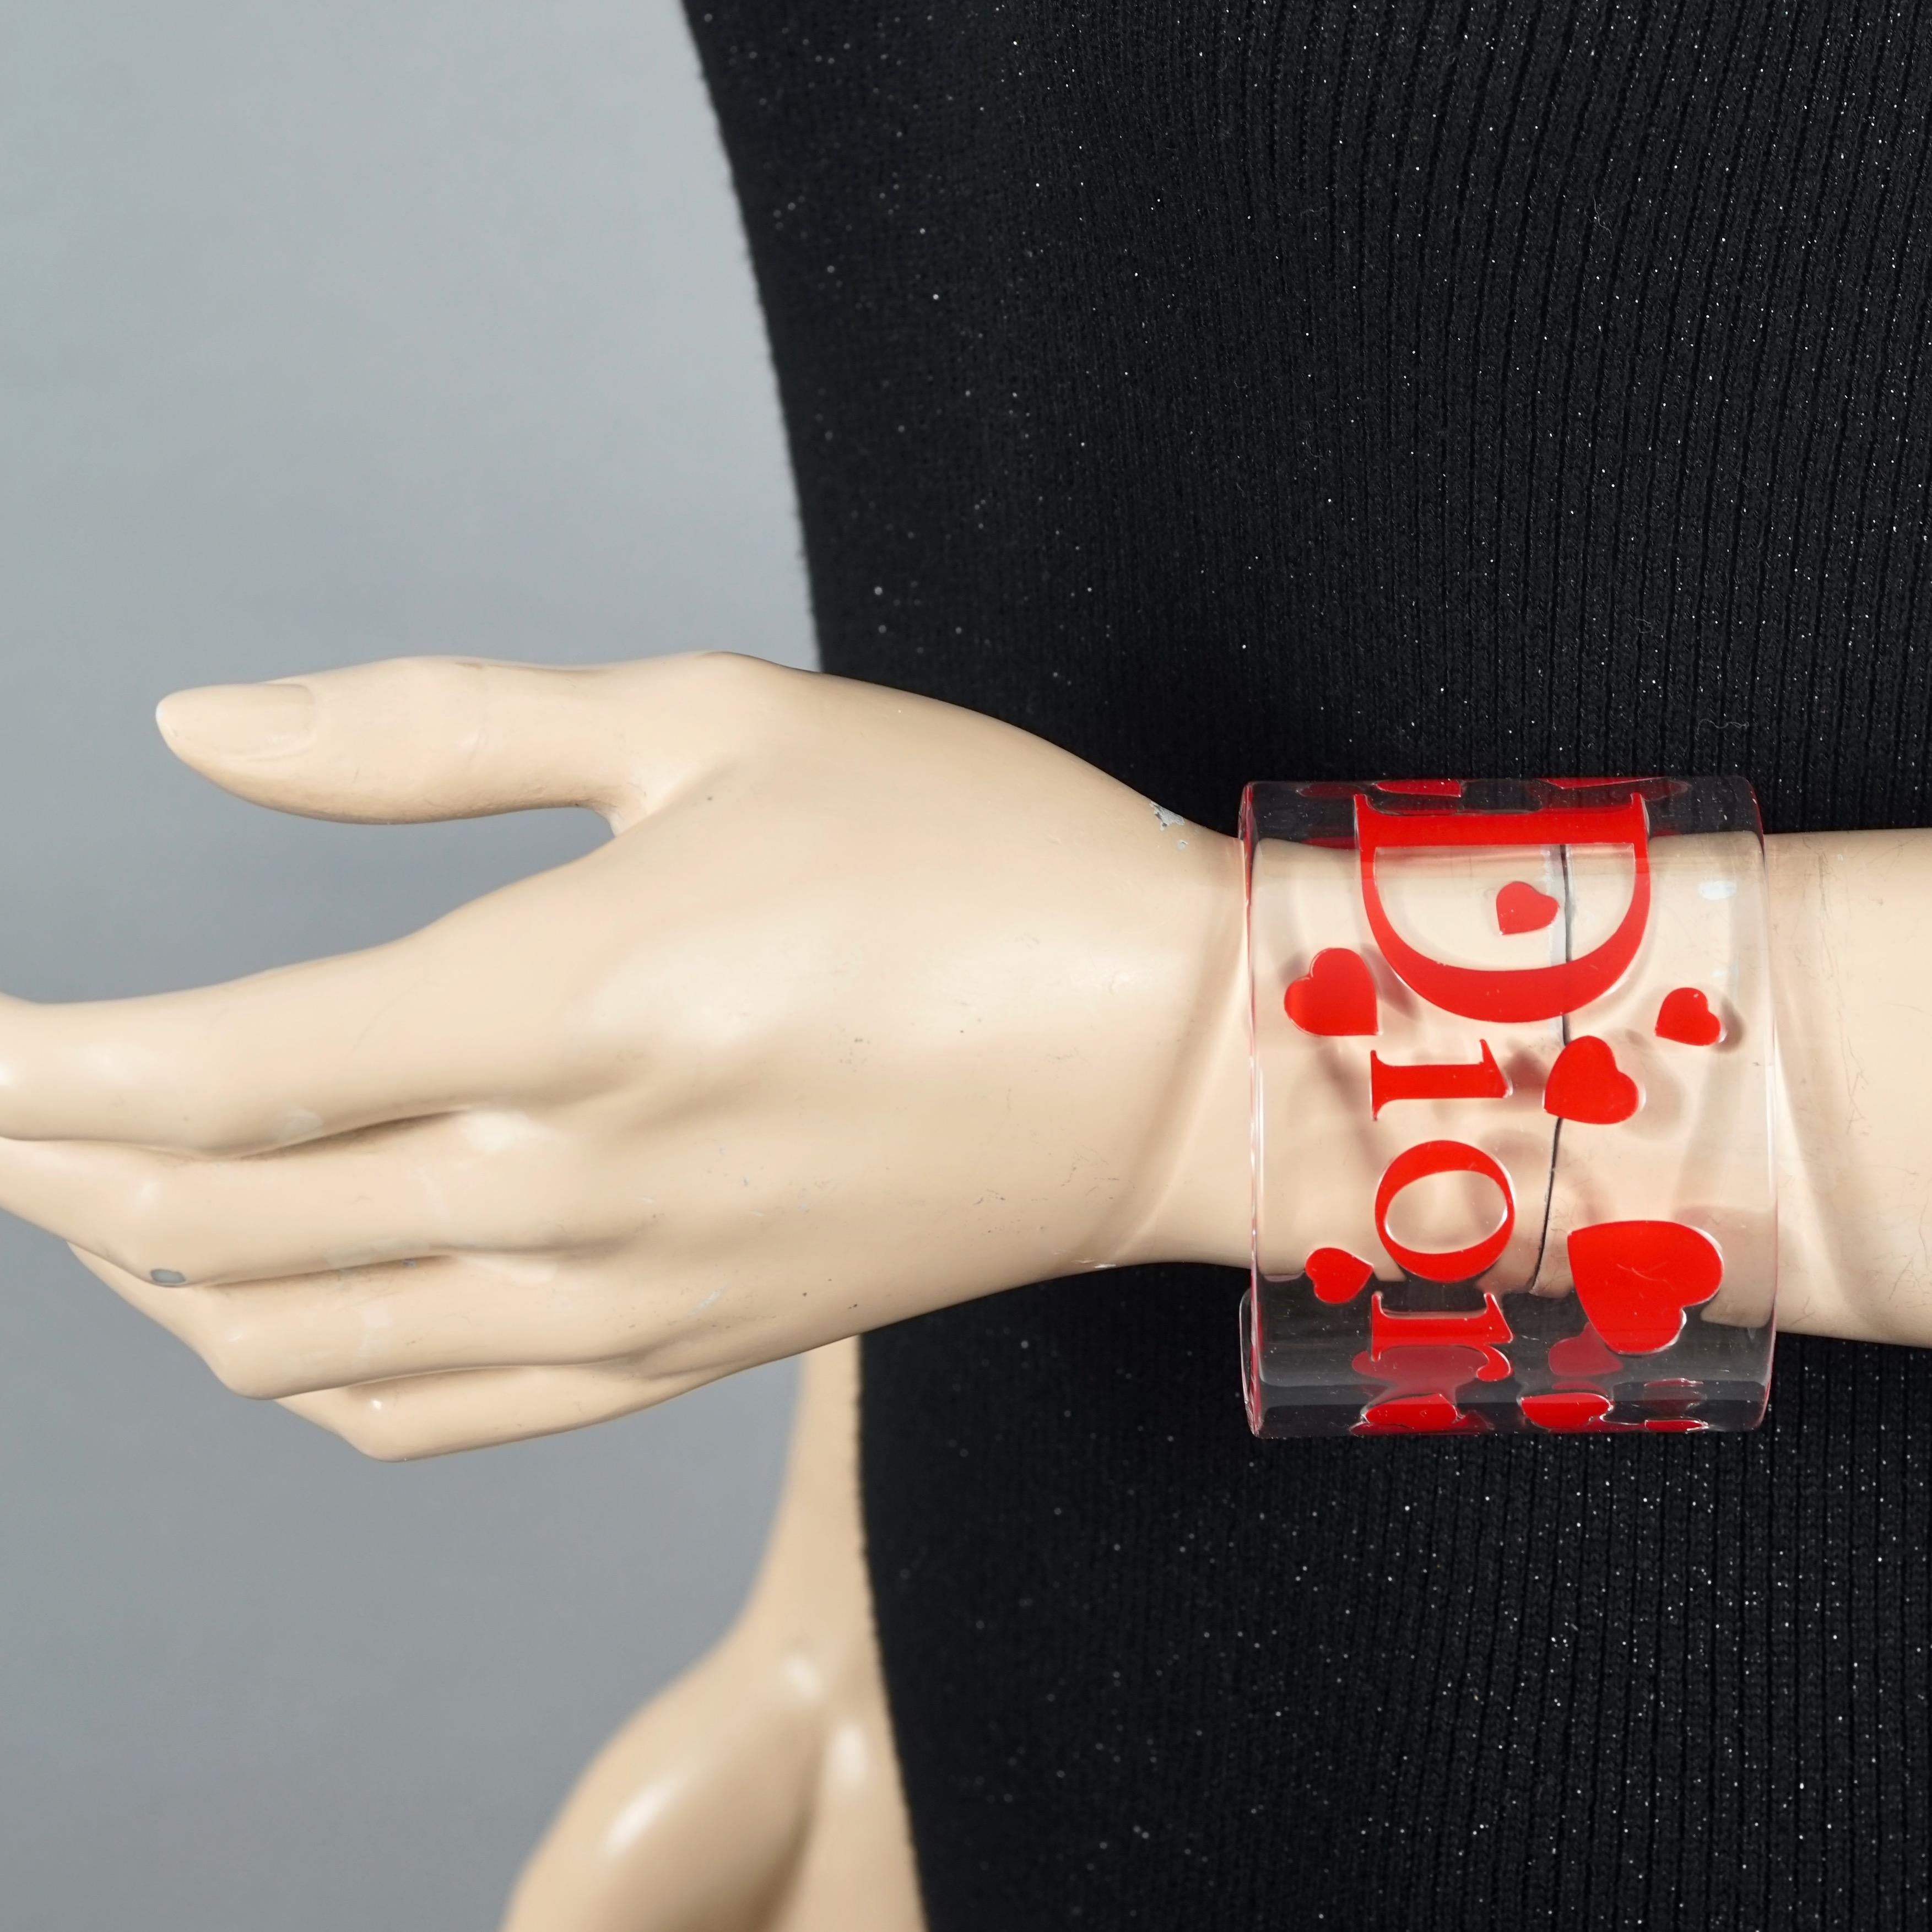 Vintage CHRISTIAN DIOR Logo Heart Lucite Cuff Bracelet

Measurements:
Height: 2.24 inches (5.7 cm)
Inner Diameter: 7.08 inches (18 cm)

Features:
- 100% Authentic CHRISTIAN DIOR.
- Clear lucite acrylic cuff with red DIOR logo and hearts.
- Pieces in